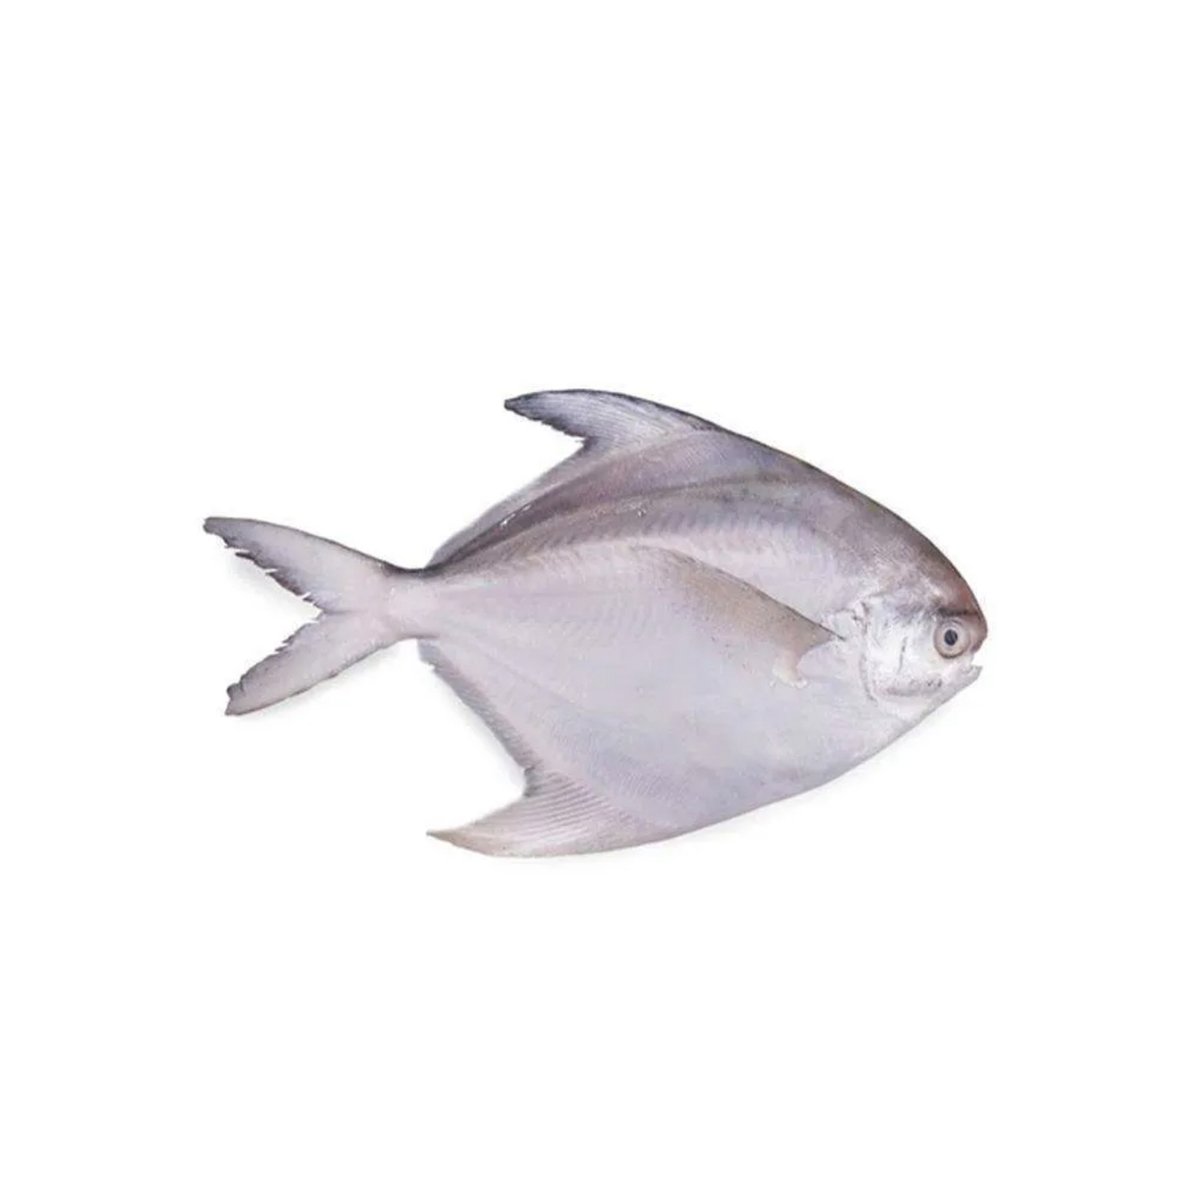 Bawal Putih Kecil(White Pomfret)500g Approx Weight